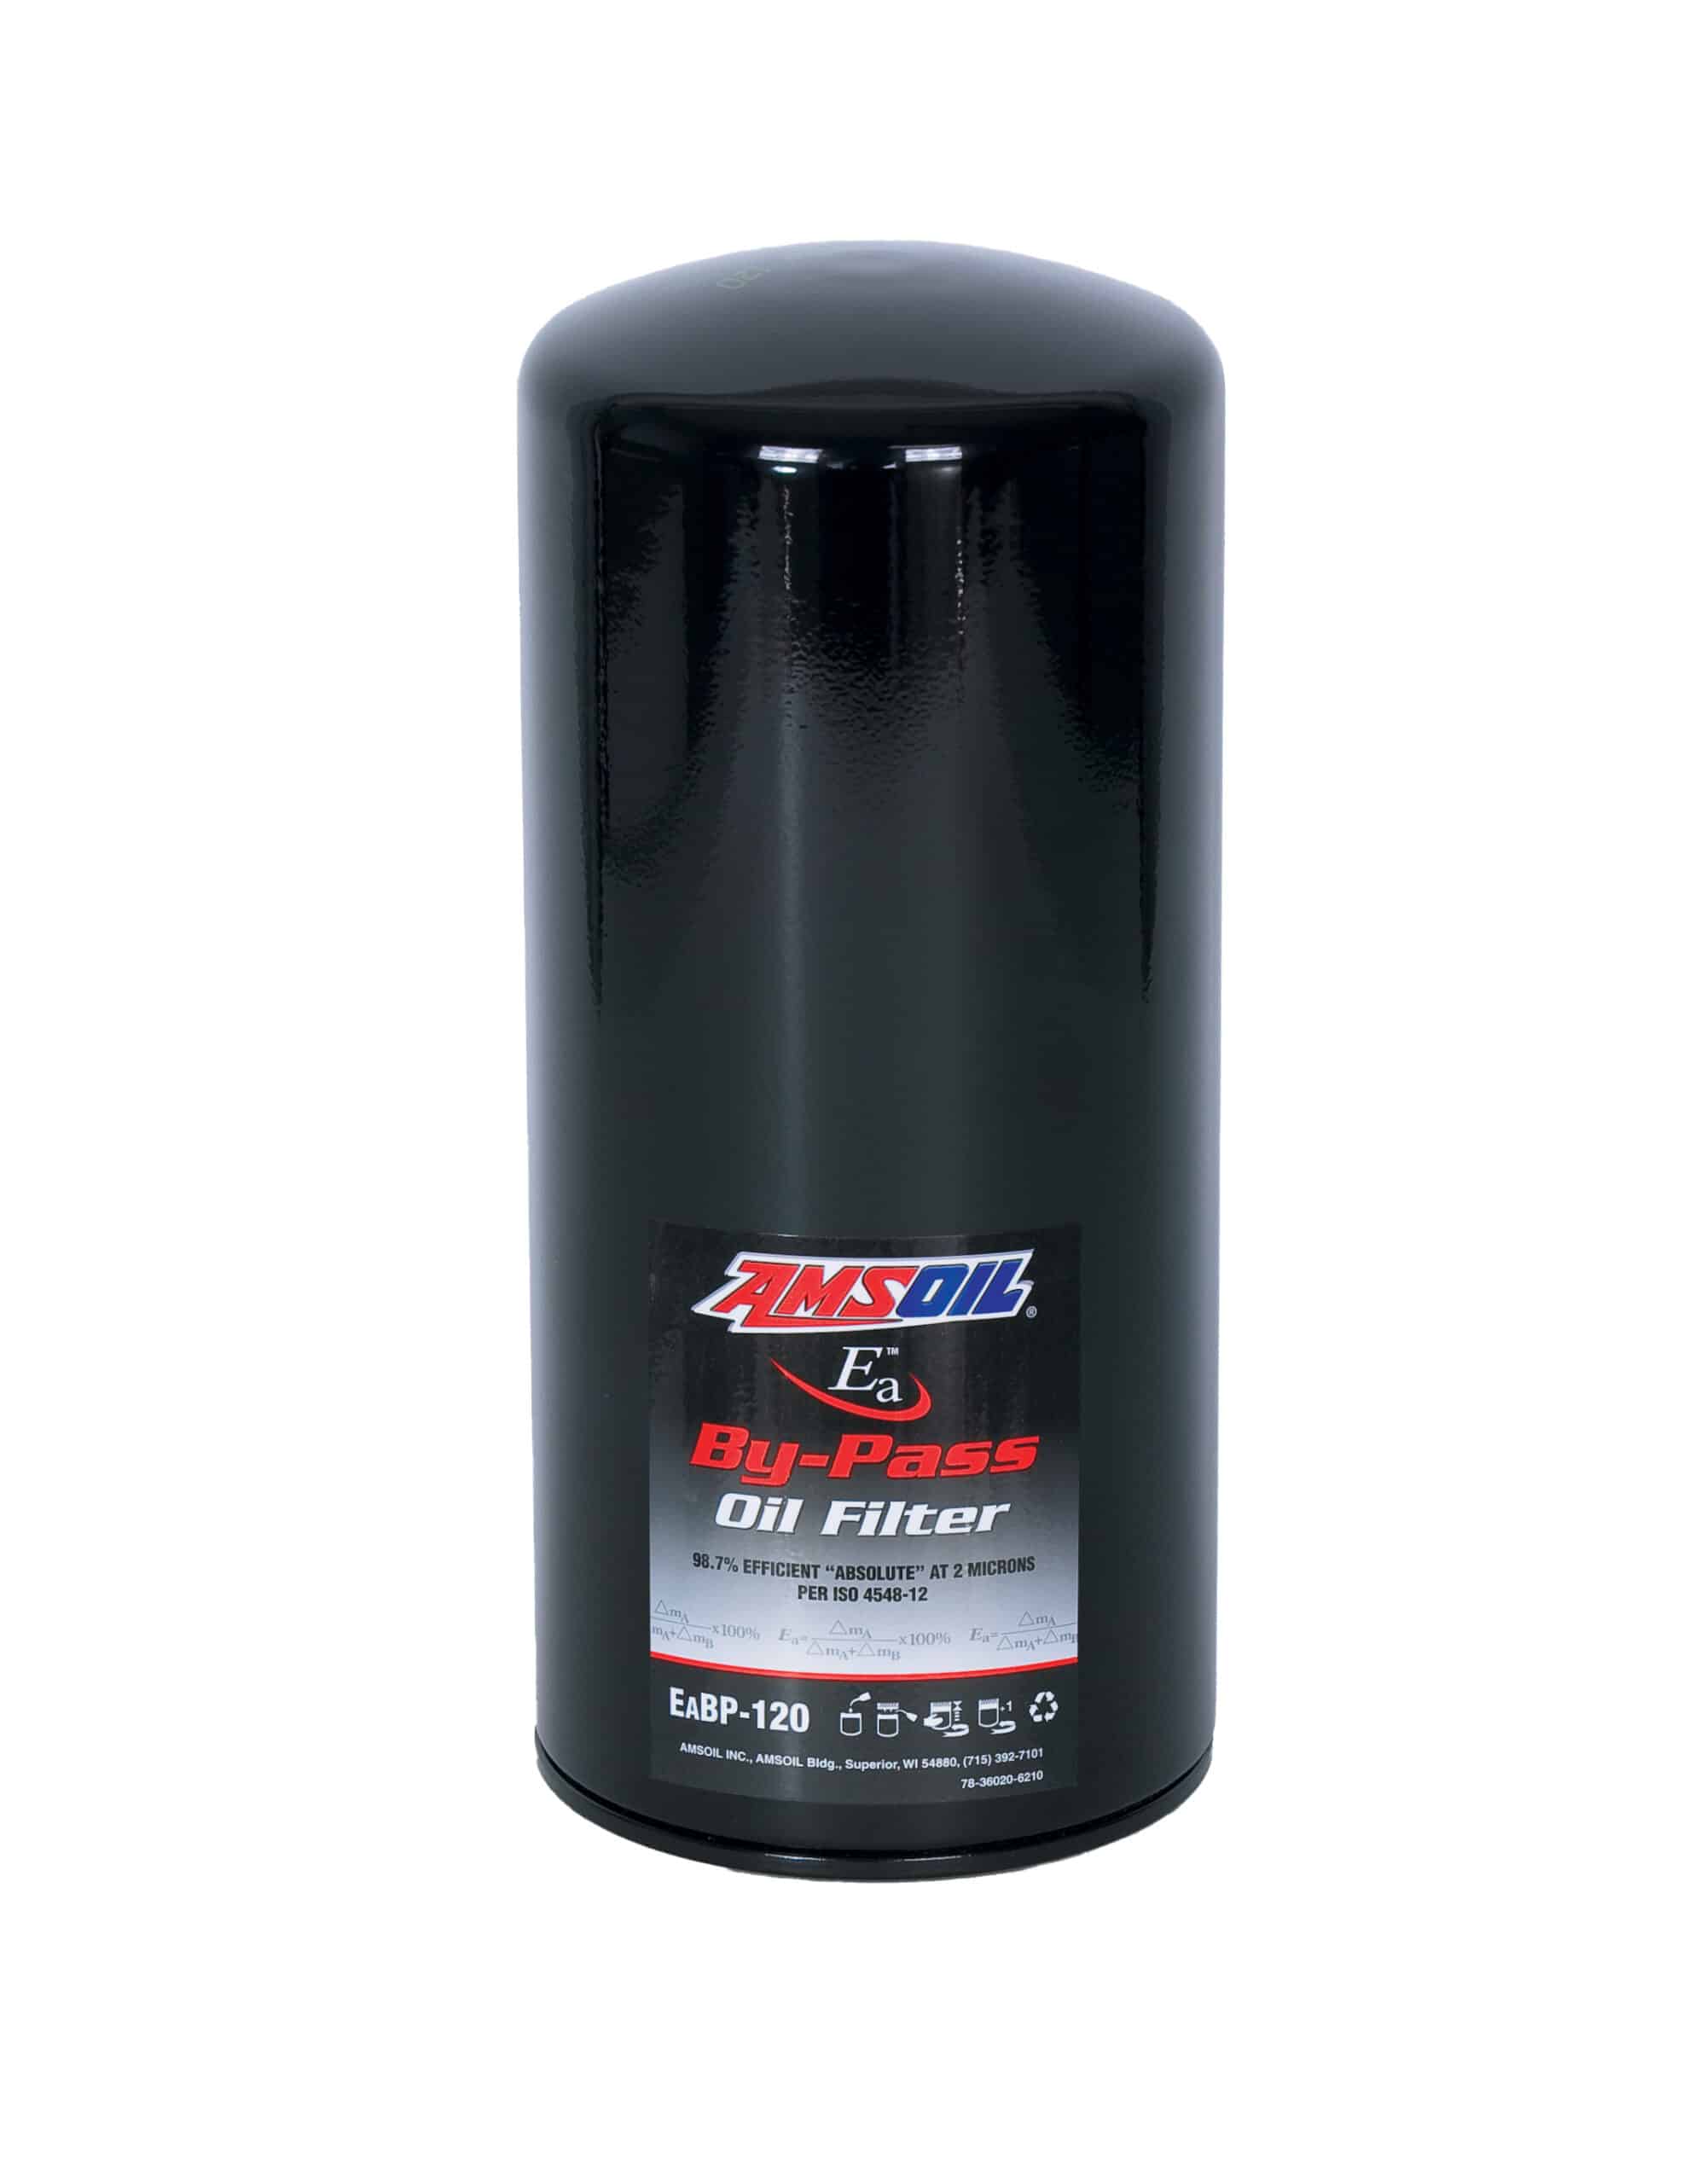 A can of AMSOIL Bypass Oil Filter. They provide maximum filtration protection against wear and oil contamination. They have an absolute efficiency of 98.7%.